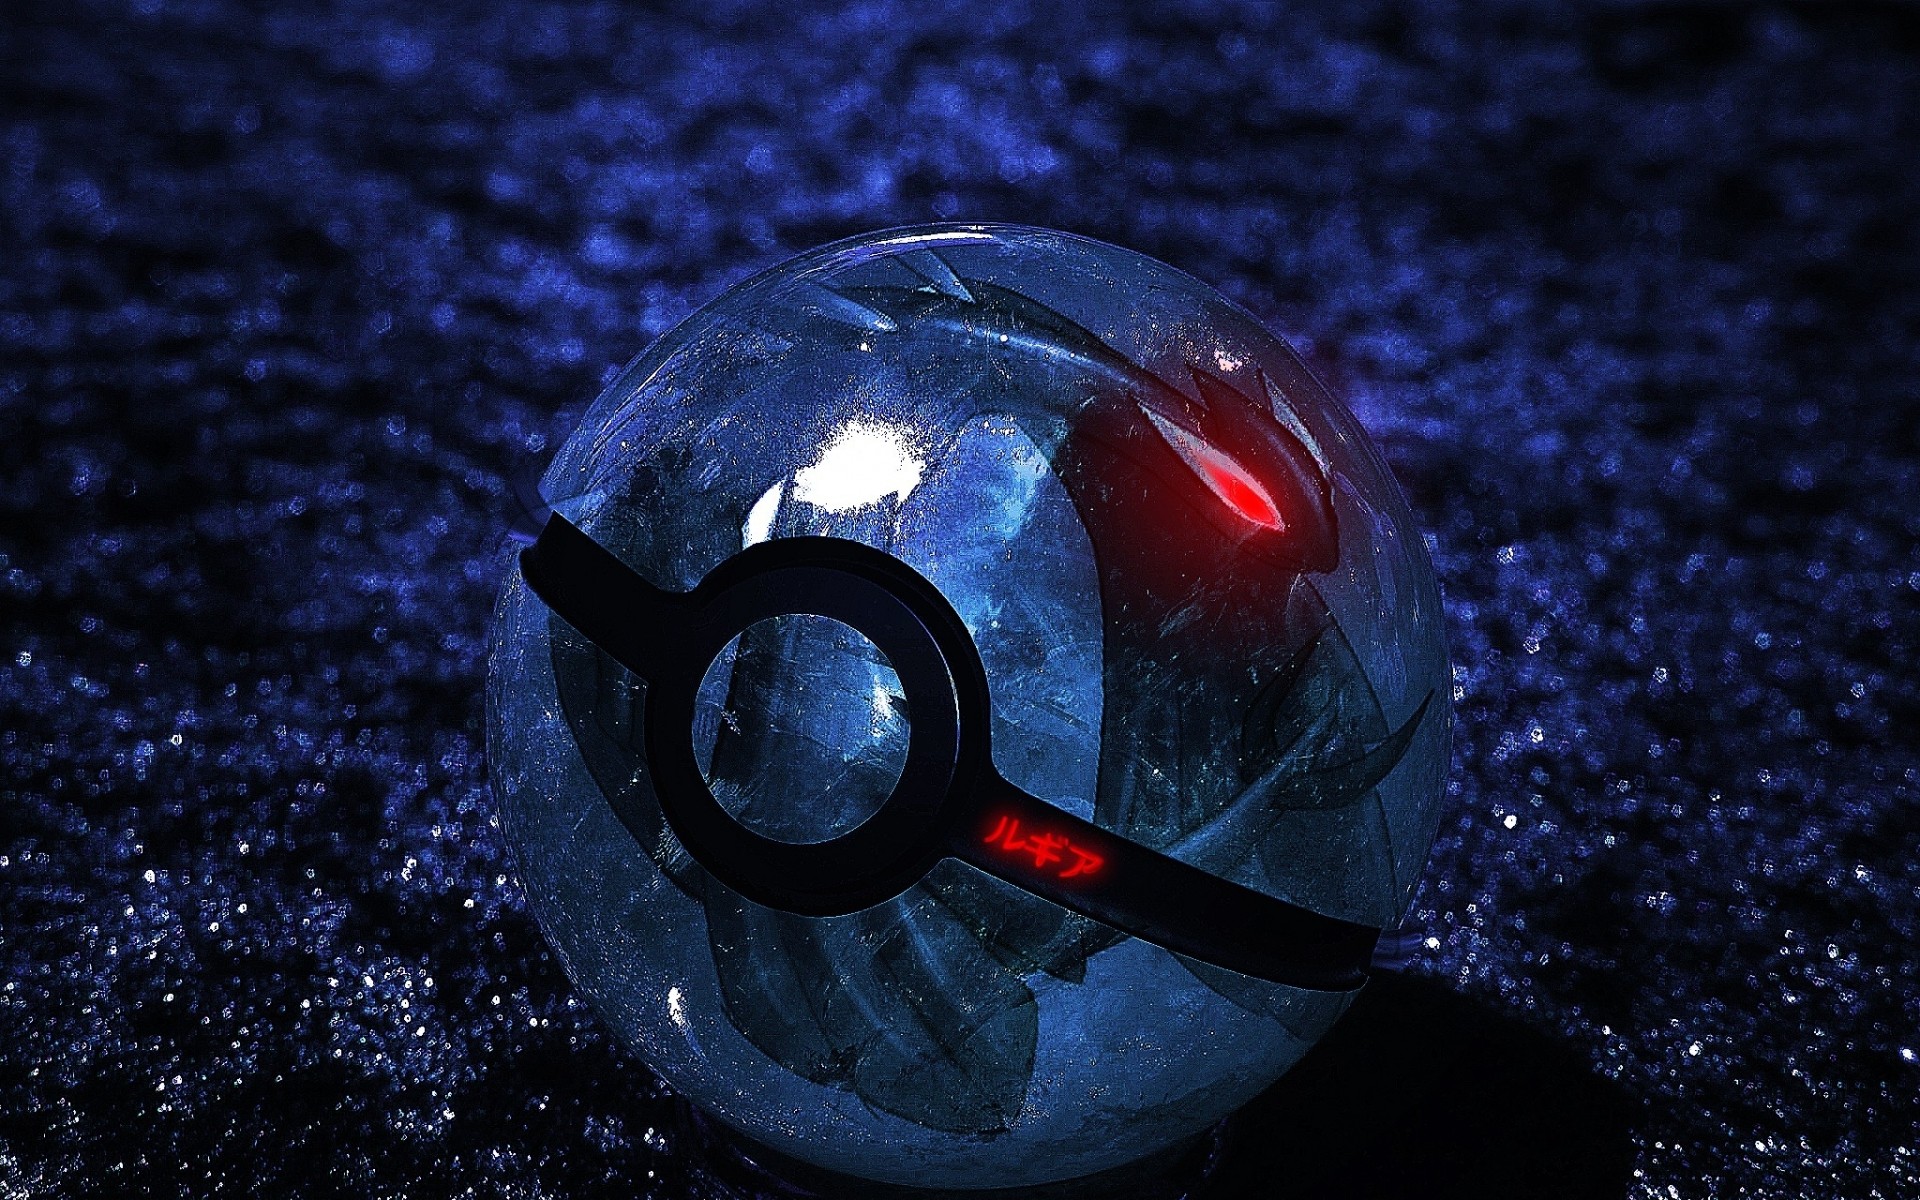 The Clear Pokeball Wallpaper